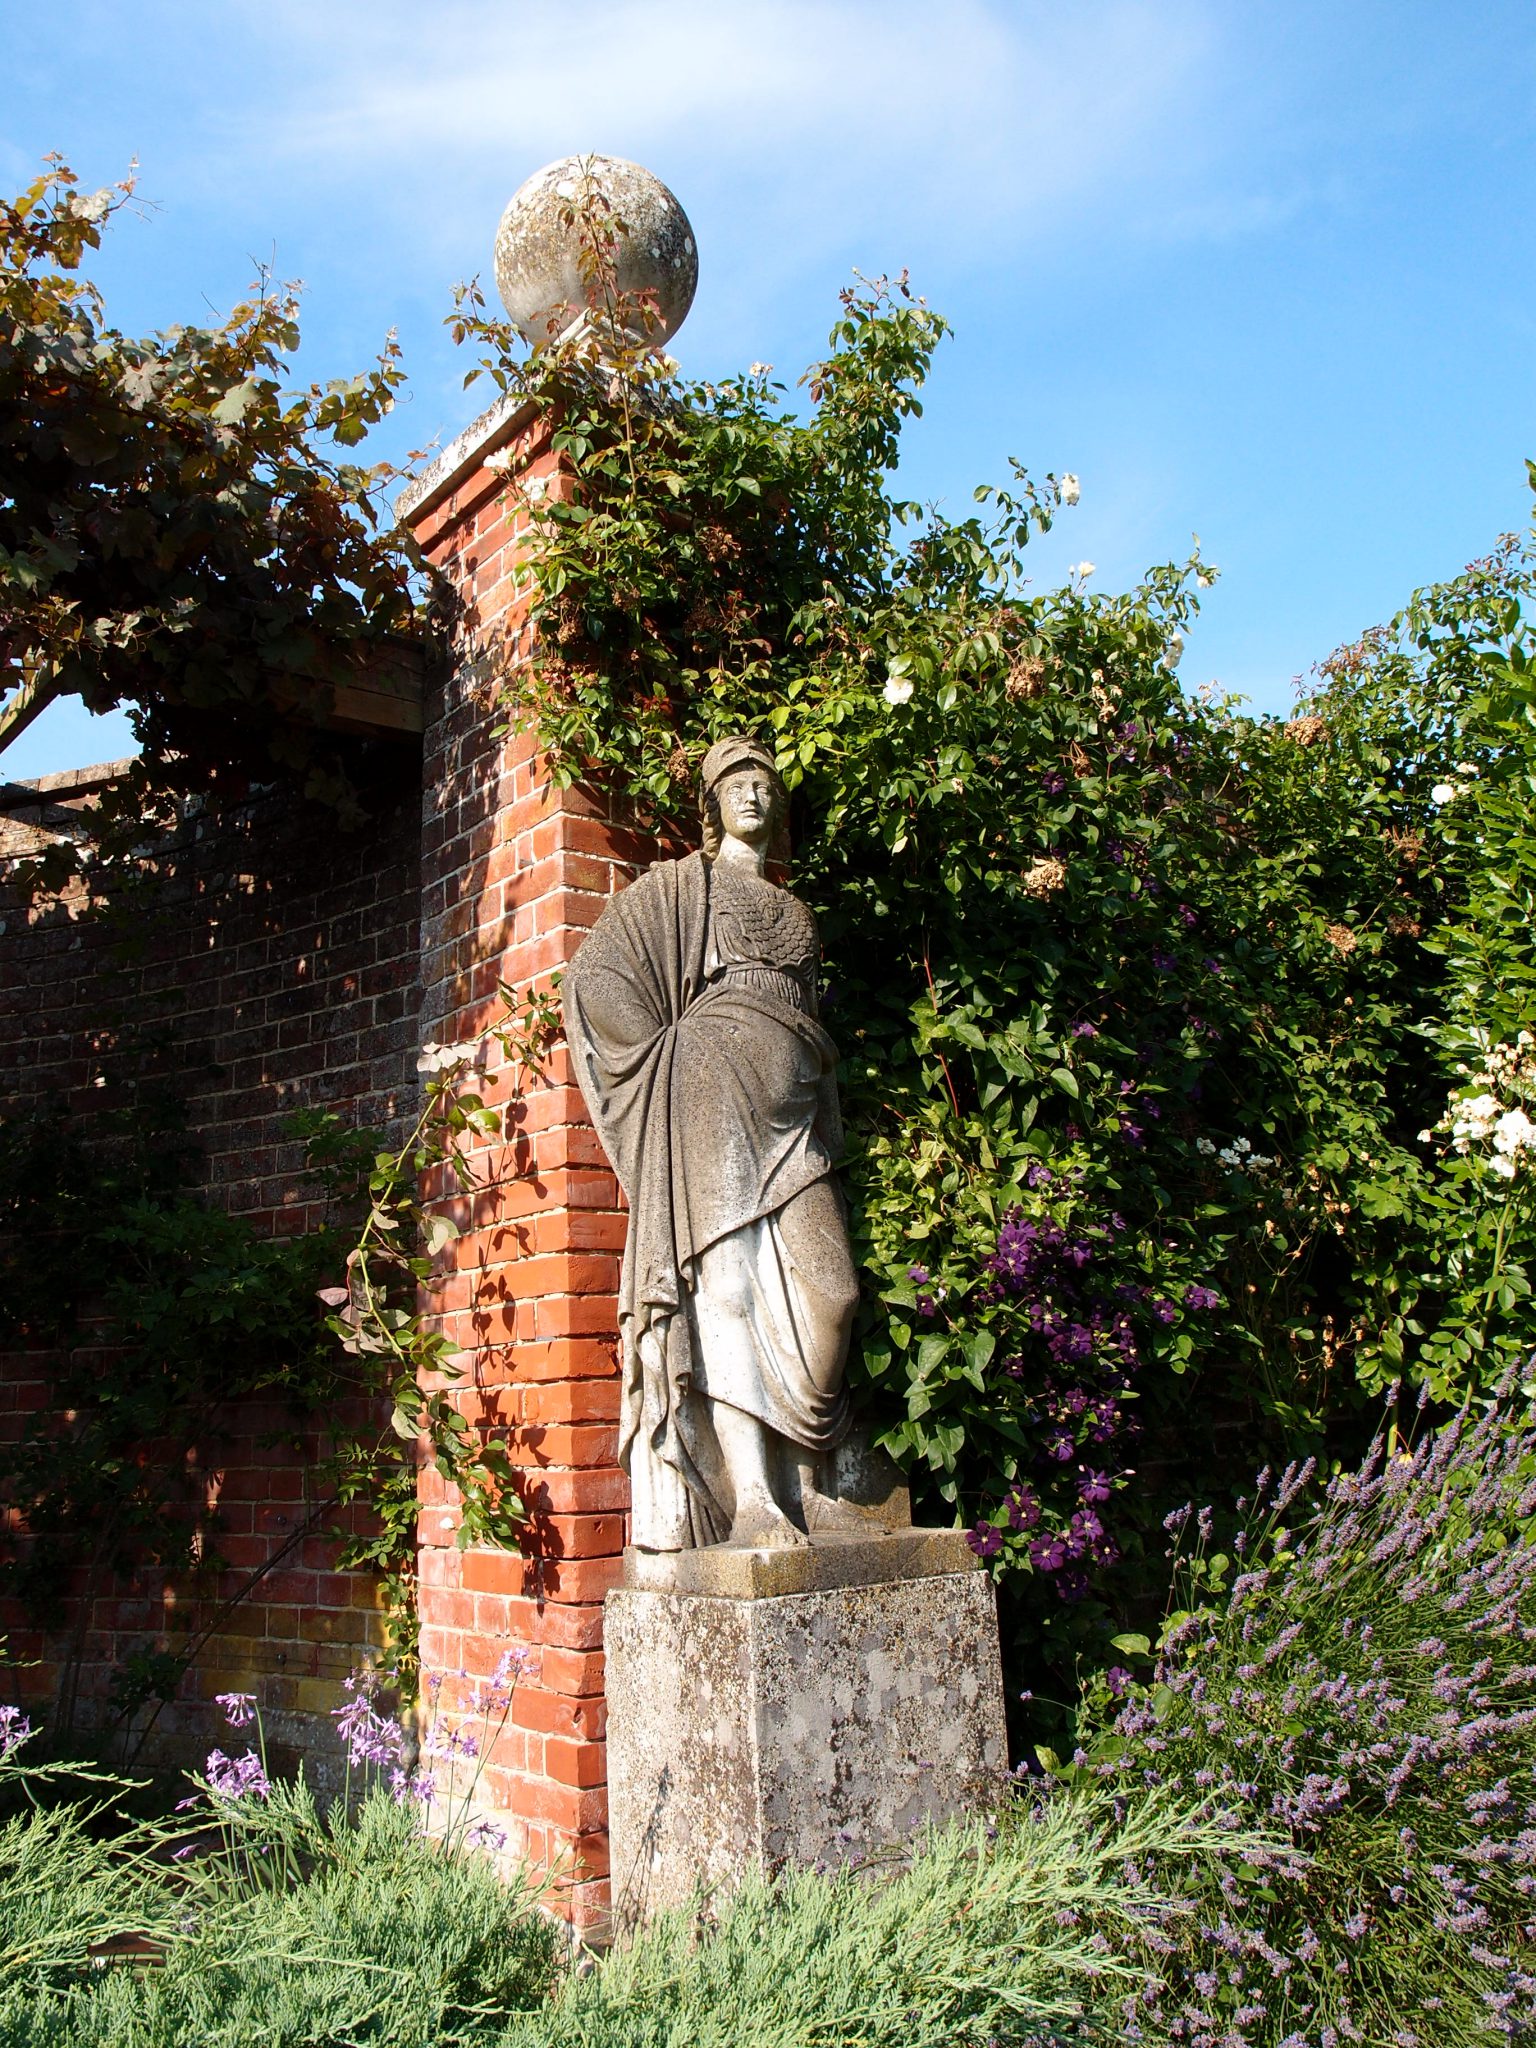 A more modestly-attired Lady stands guard in the Italian Garden